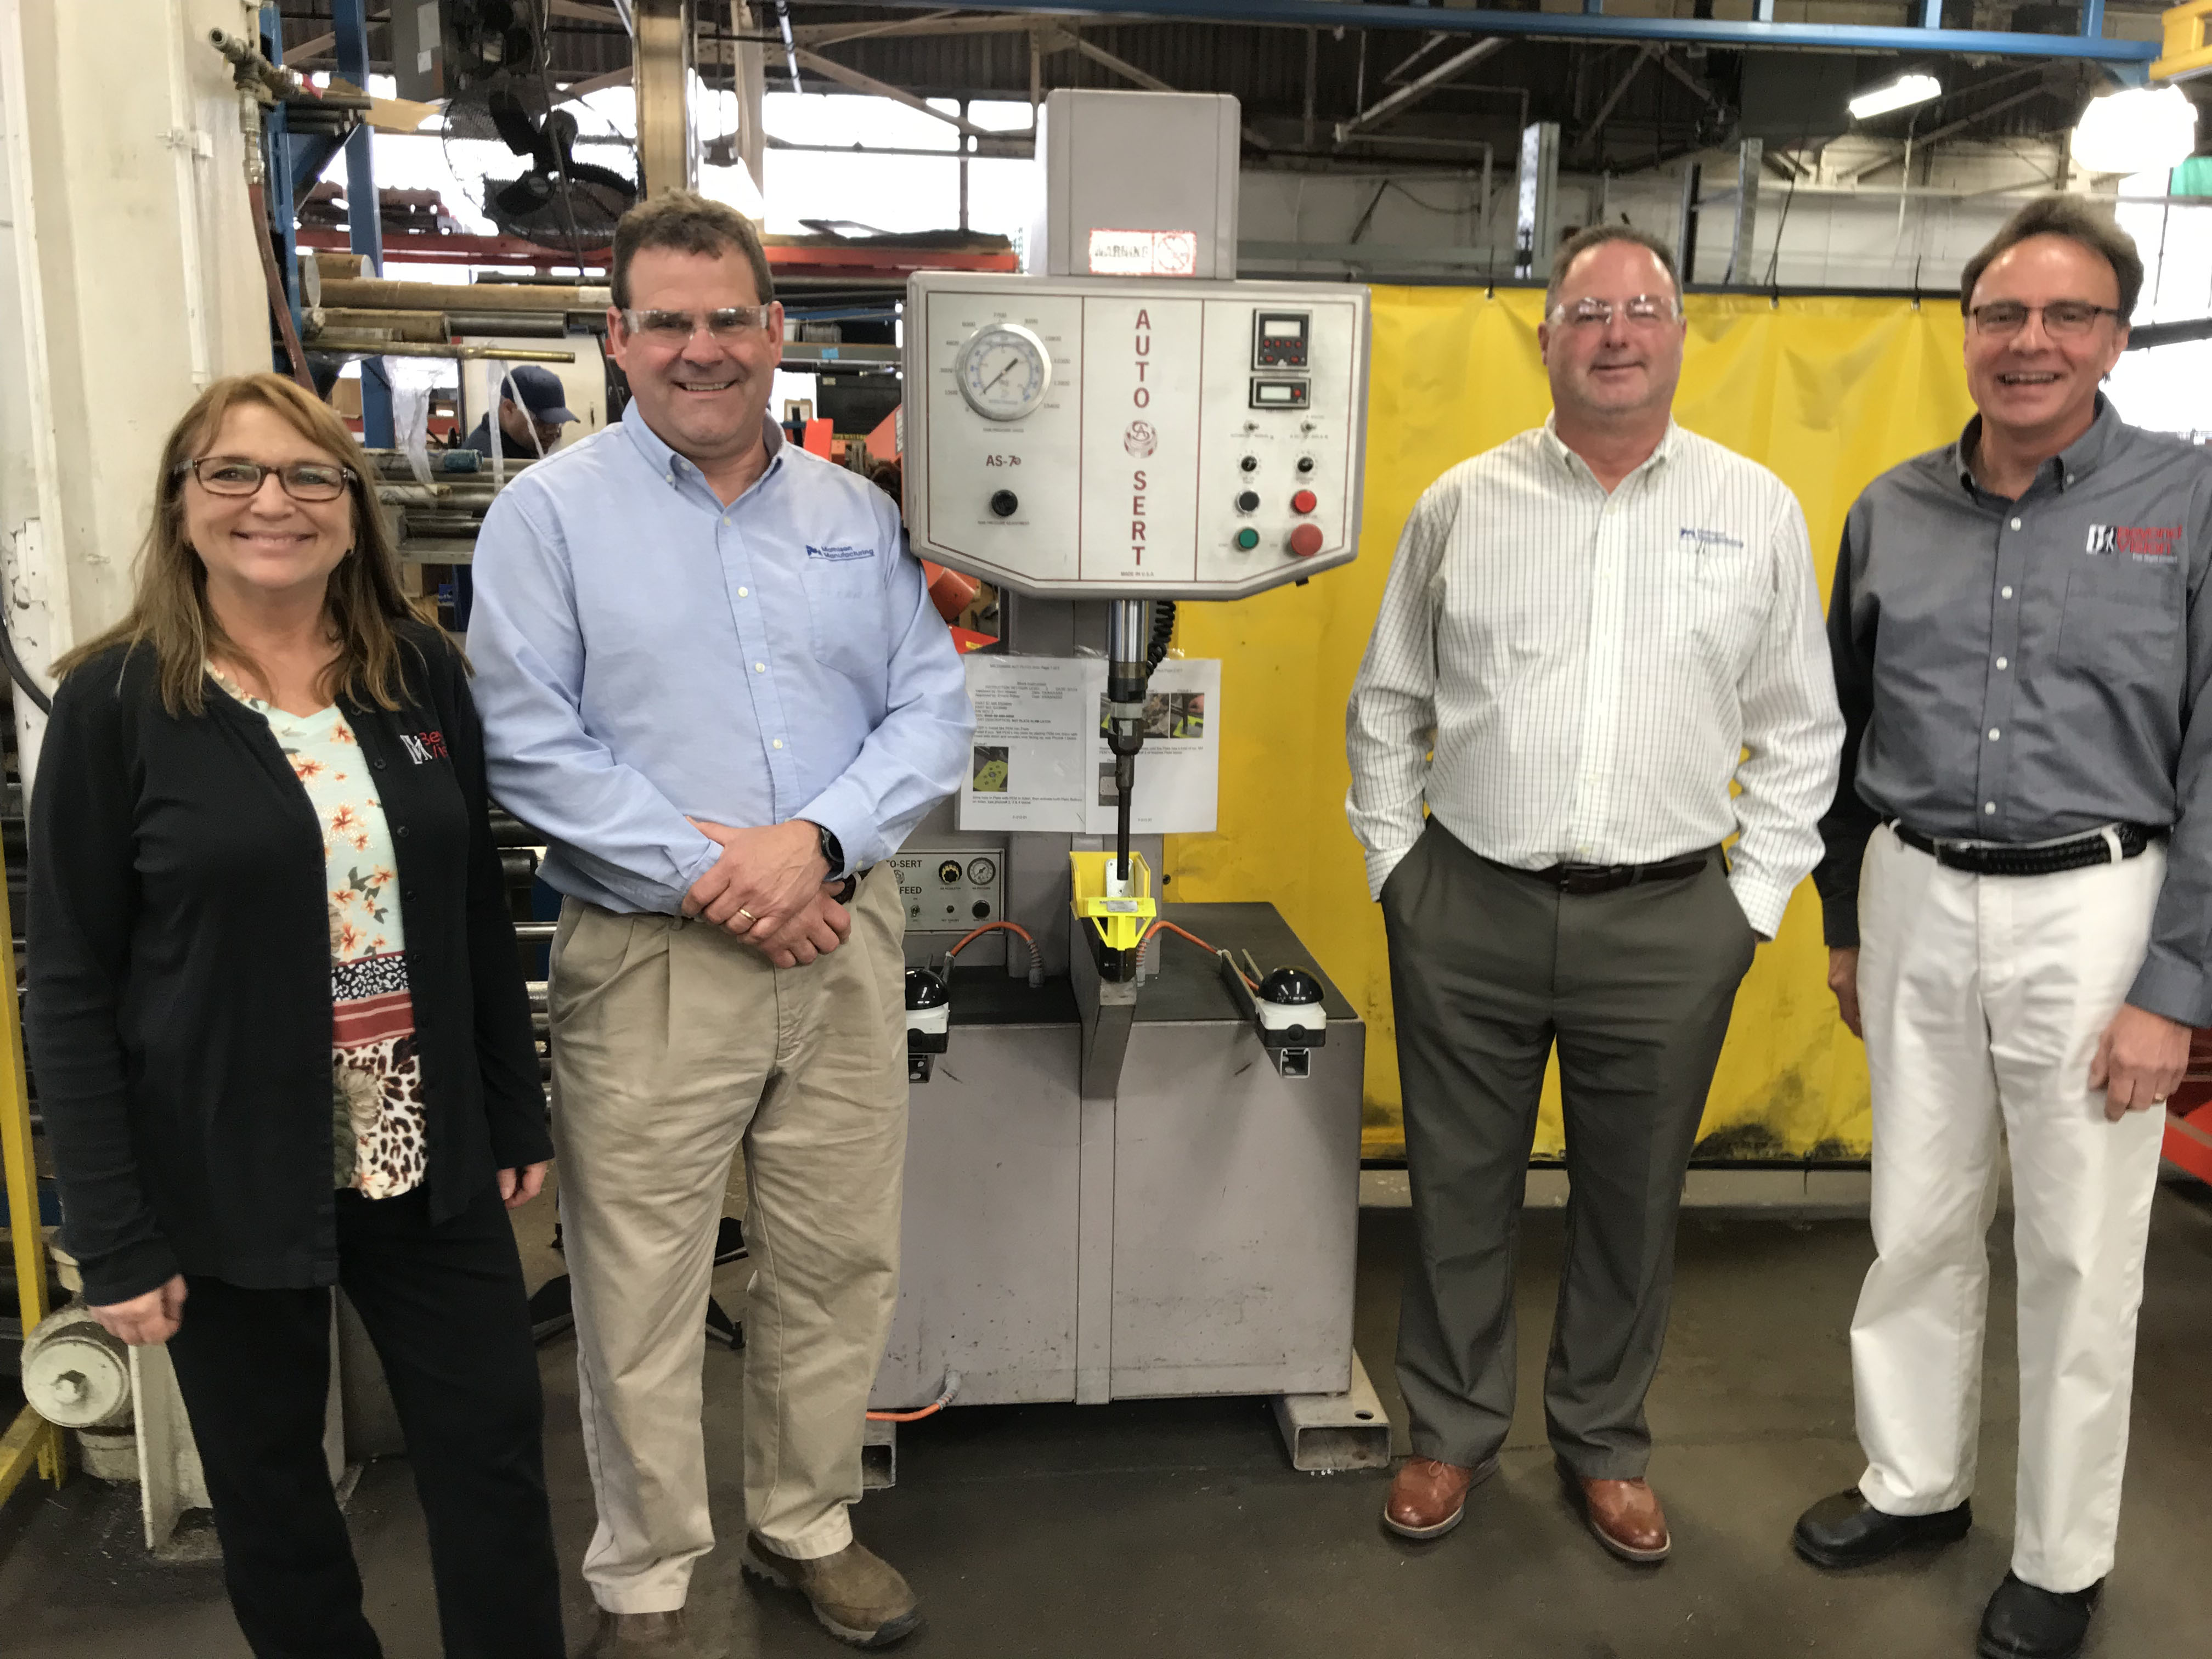 a woman and three men stand next to a narrow machine and smile. They are in a manufacturing space.